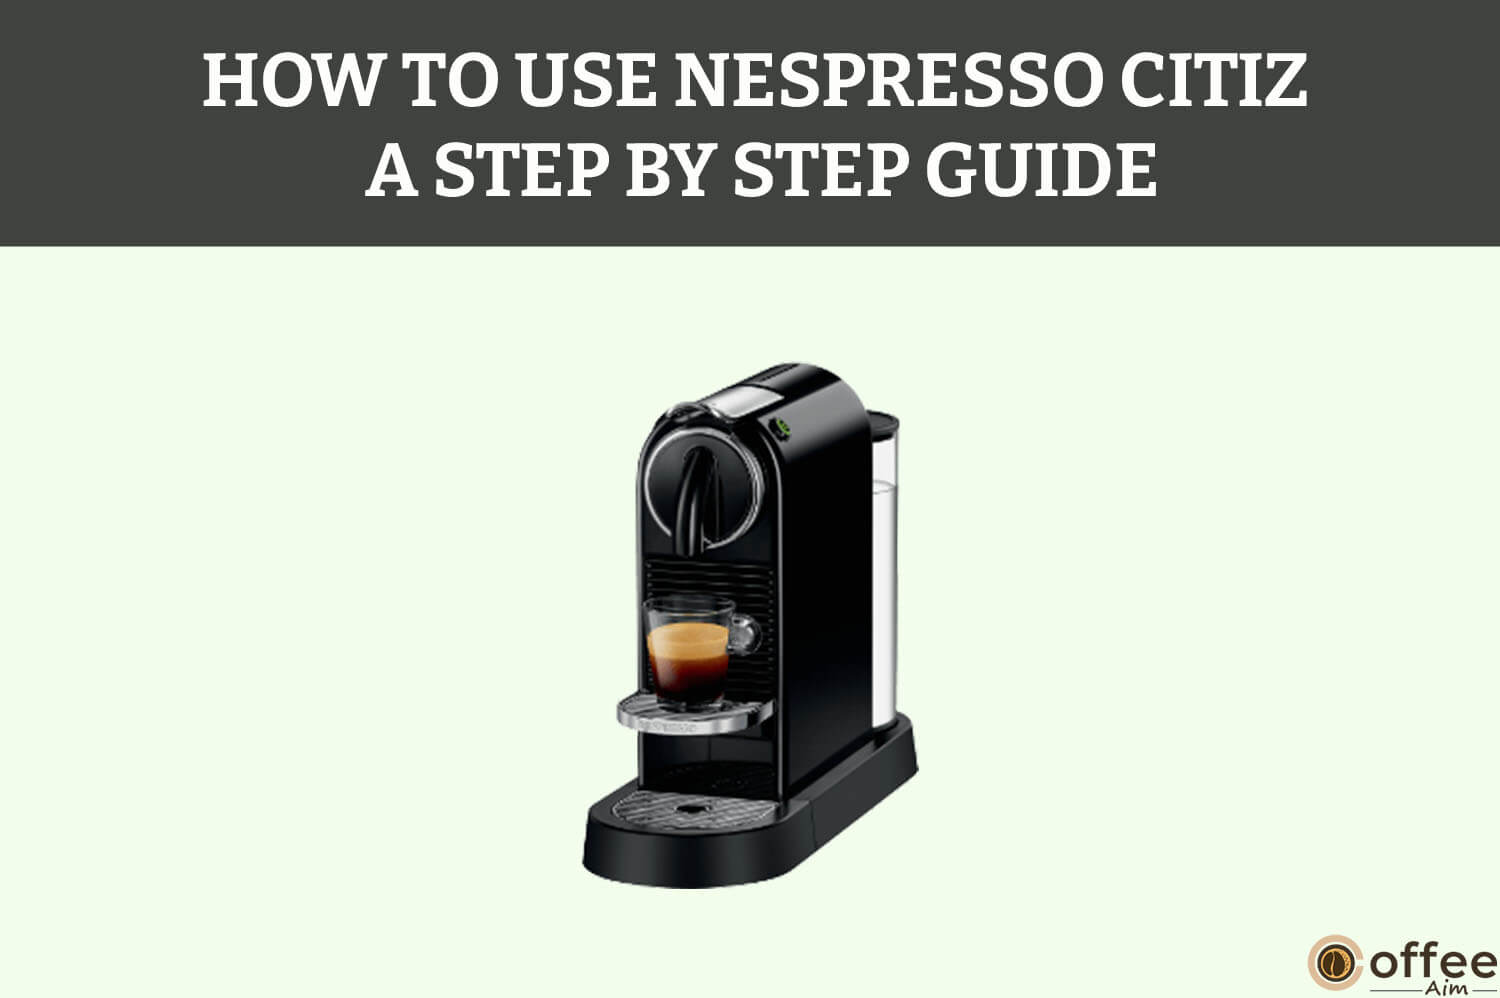 Featured image for the article "How to Use Nespresso Citiz A Step By Step Guide"